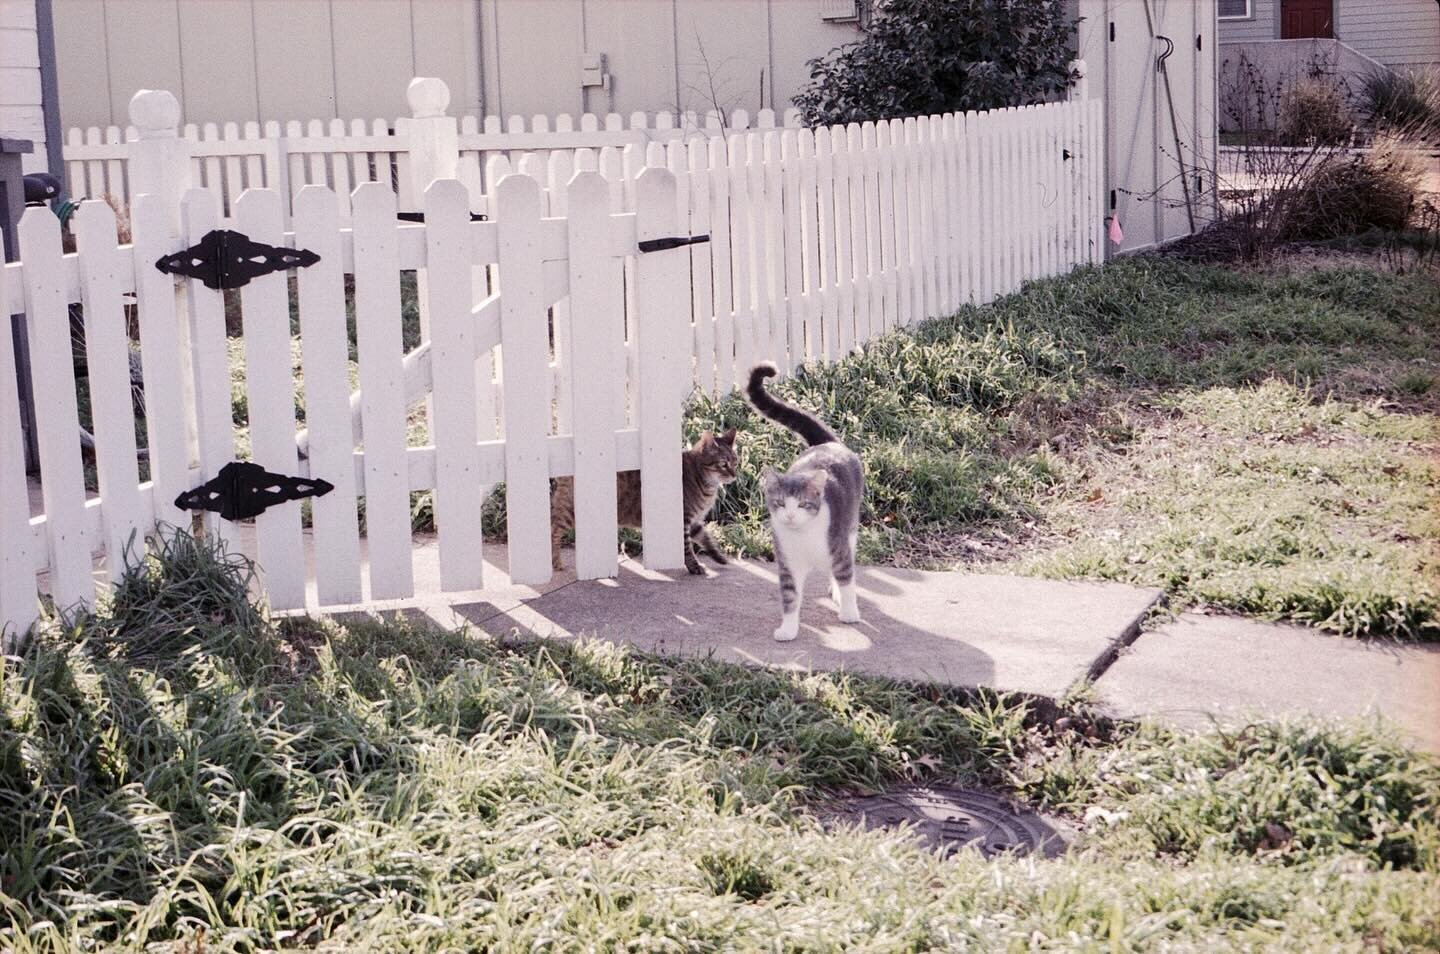 I finally managed to use a roll of #lomochromemetropolis with good results! And I made some new furry friends in the process. It seems that for me the key with that film is using a camera in auto mode rather than trying to guess at the correct exposu